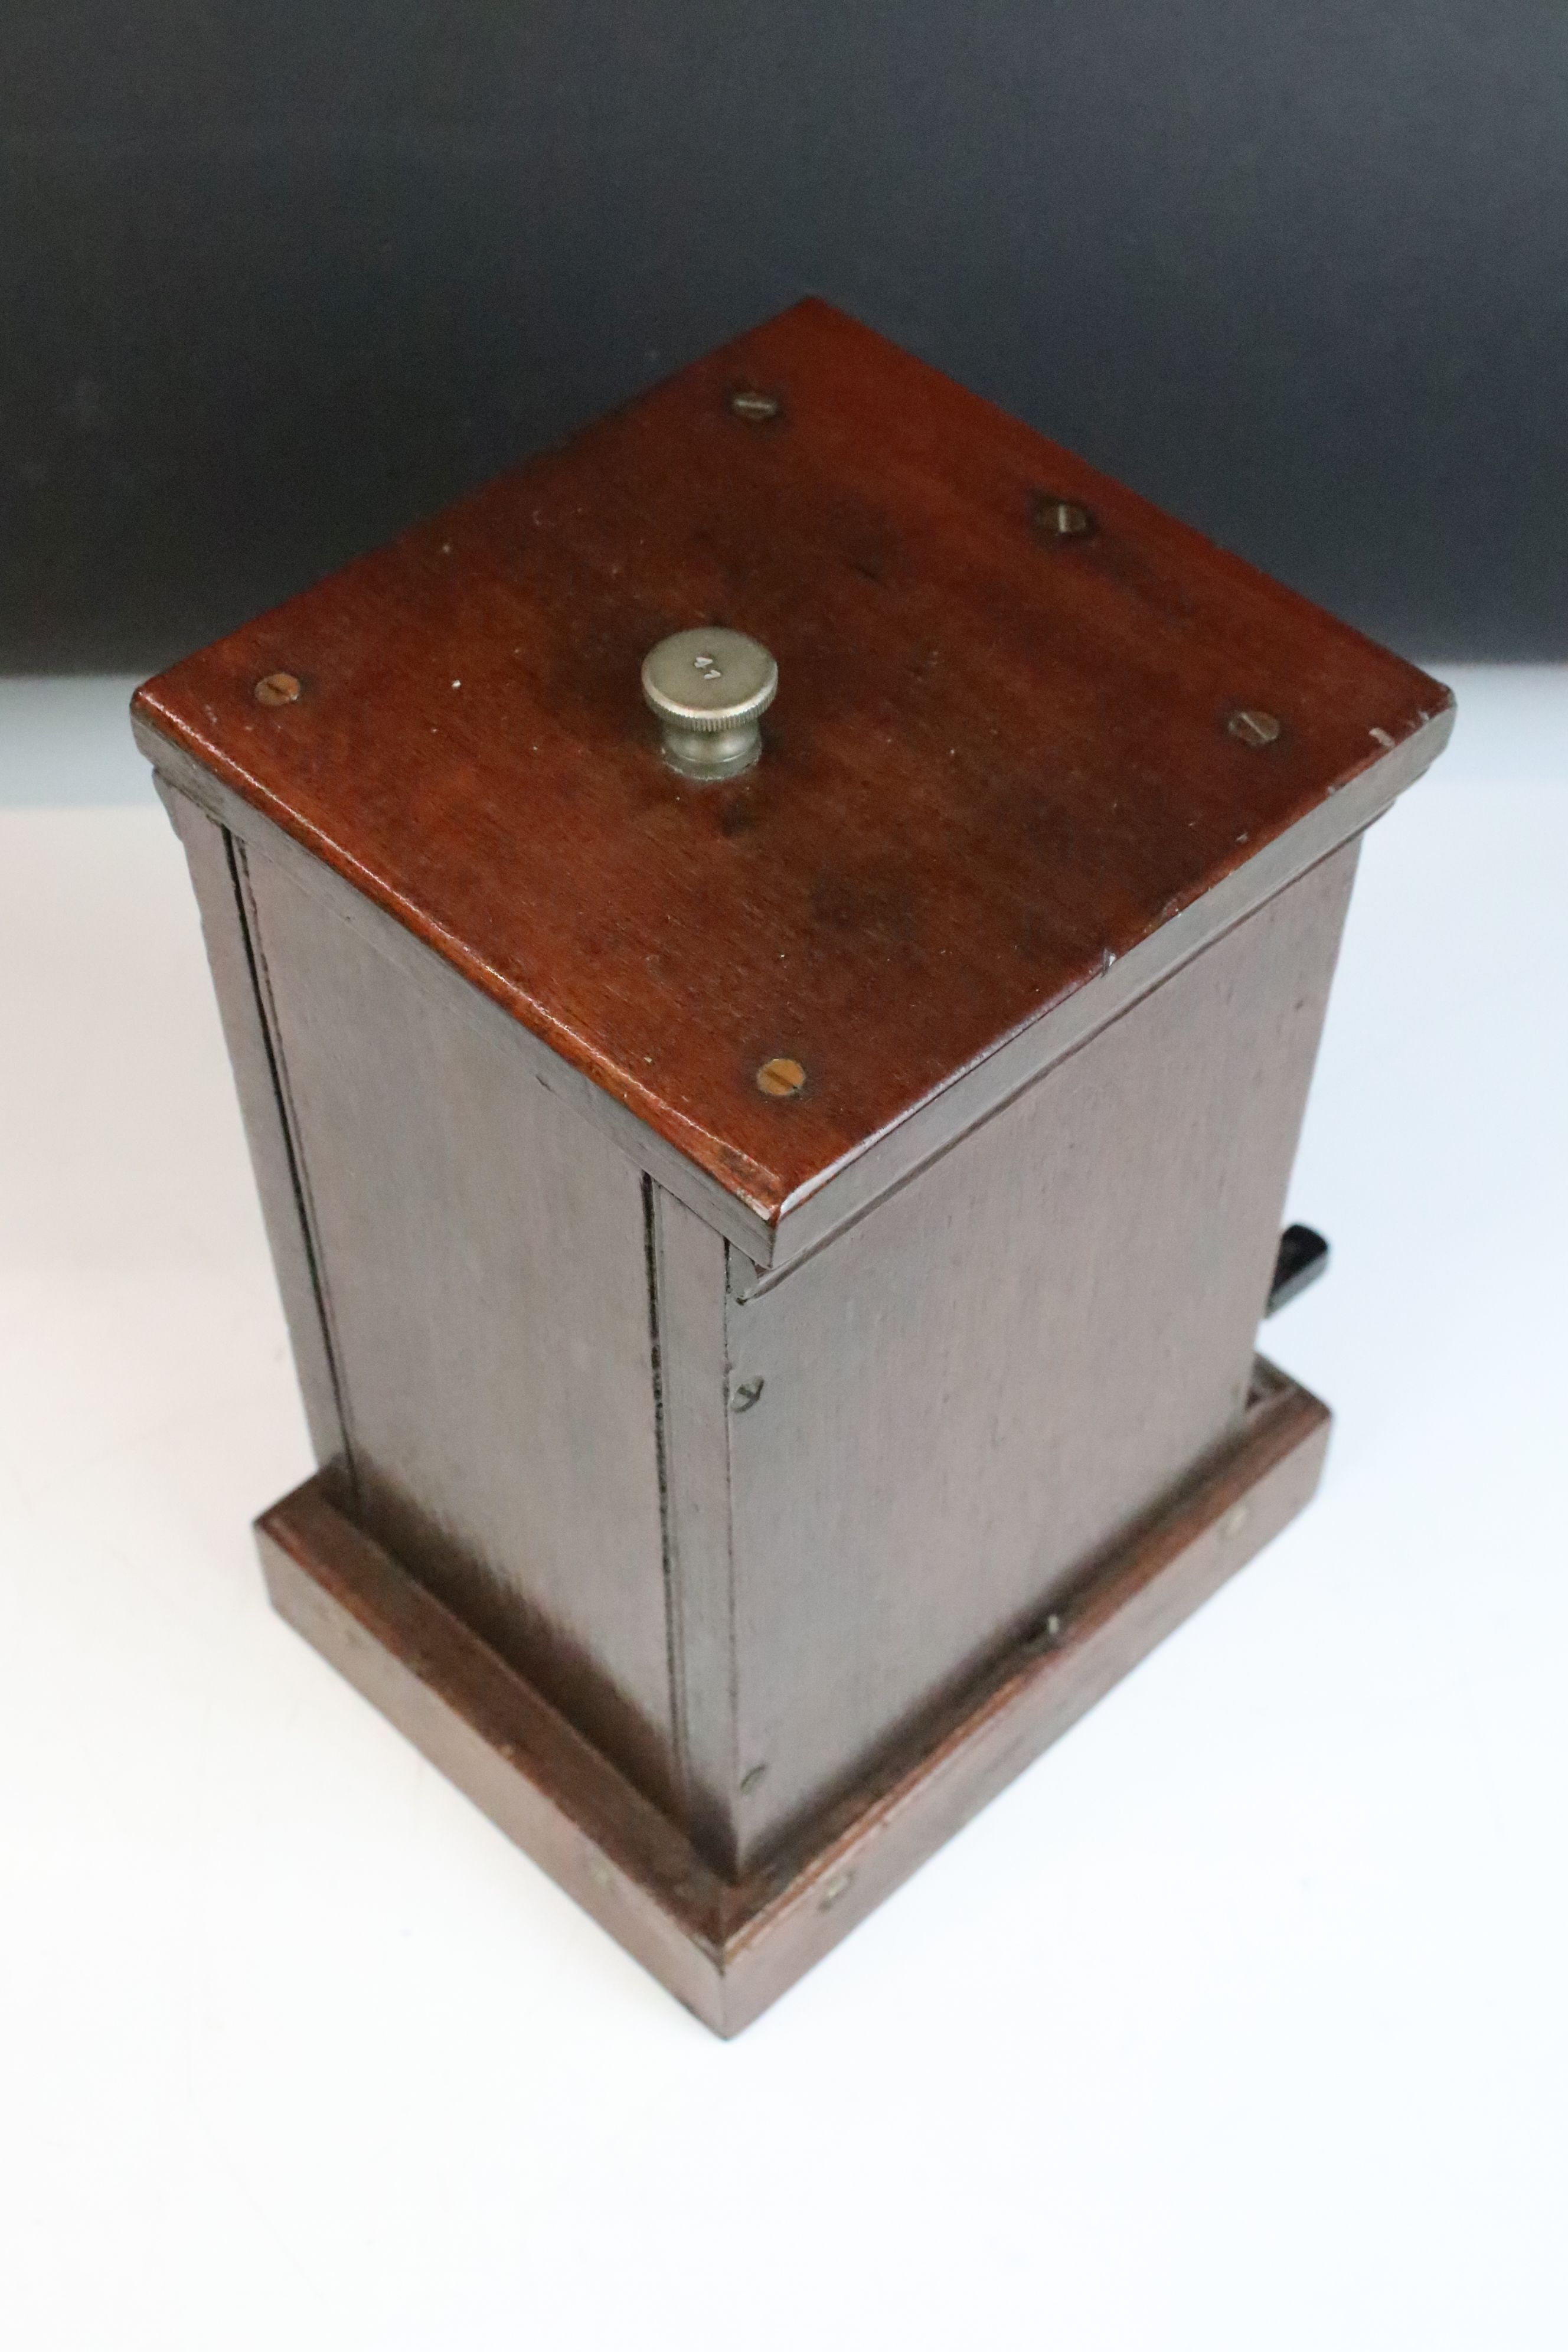 Railwayana - A Mid 20th C mahogany cased lamp repeater, with bell on/off switch. Measures approx - Image 4 of 5